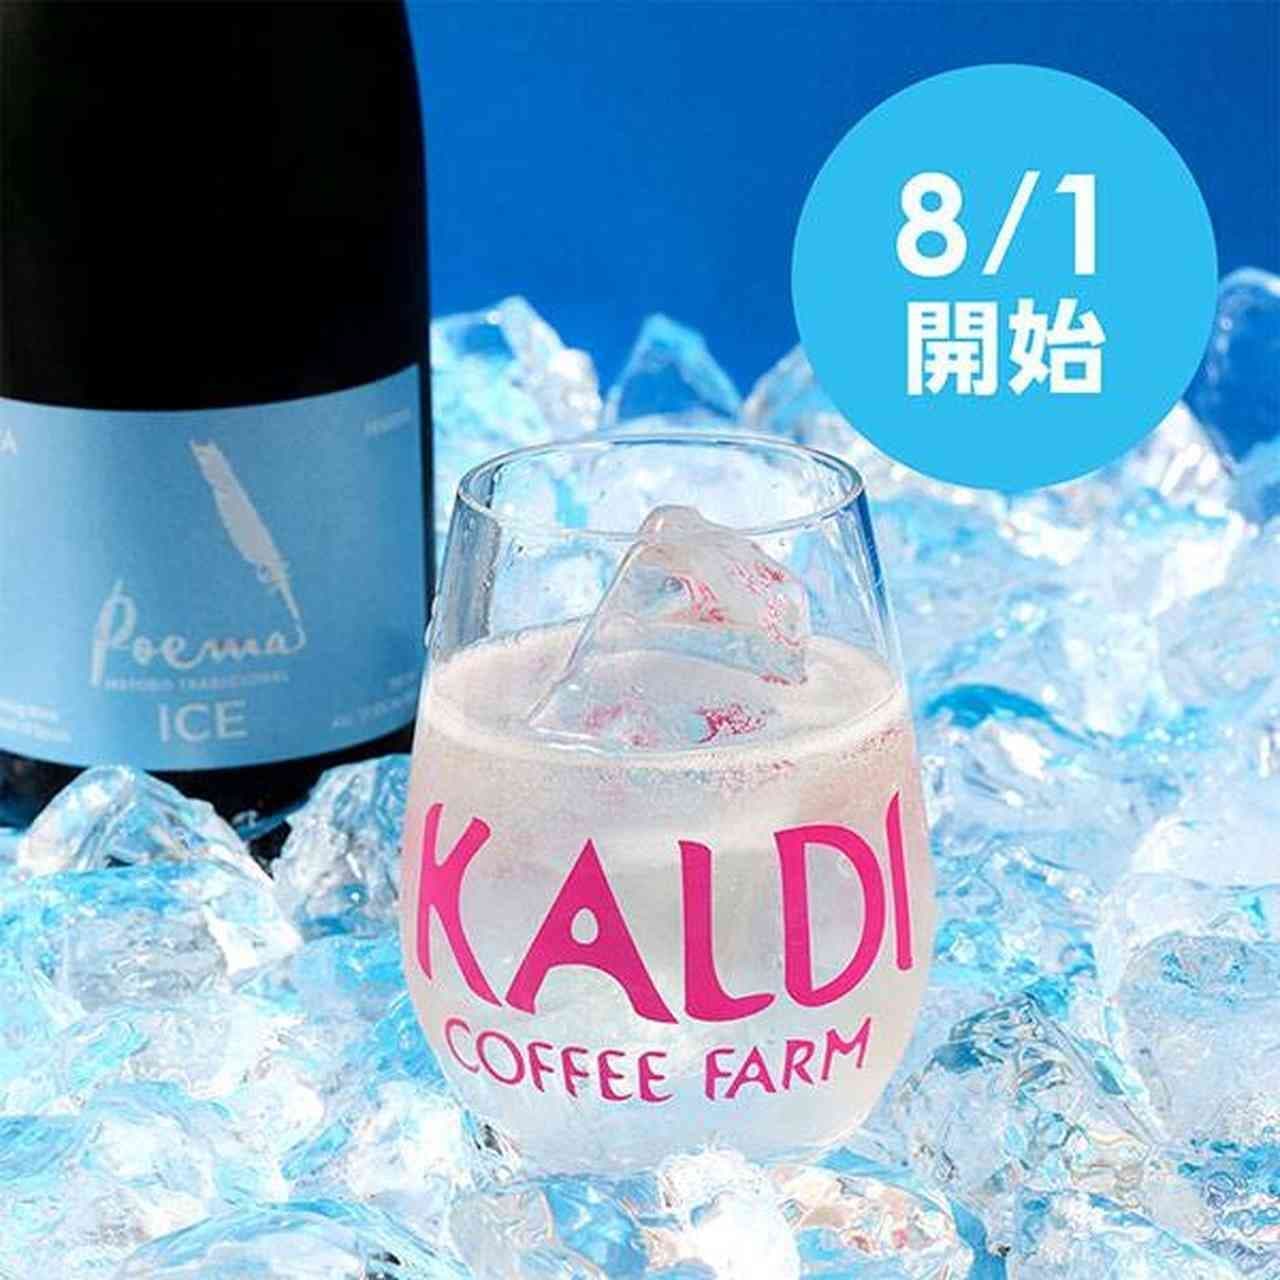 KALDI "Cava Poema Ice (white and sparkling)" purchase and receive a free wine glass